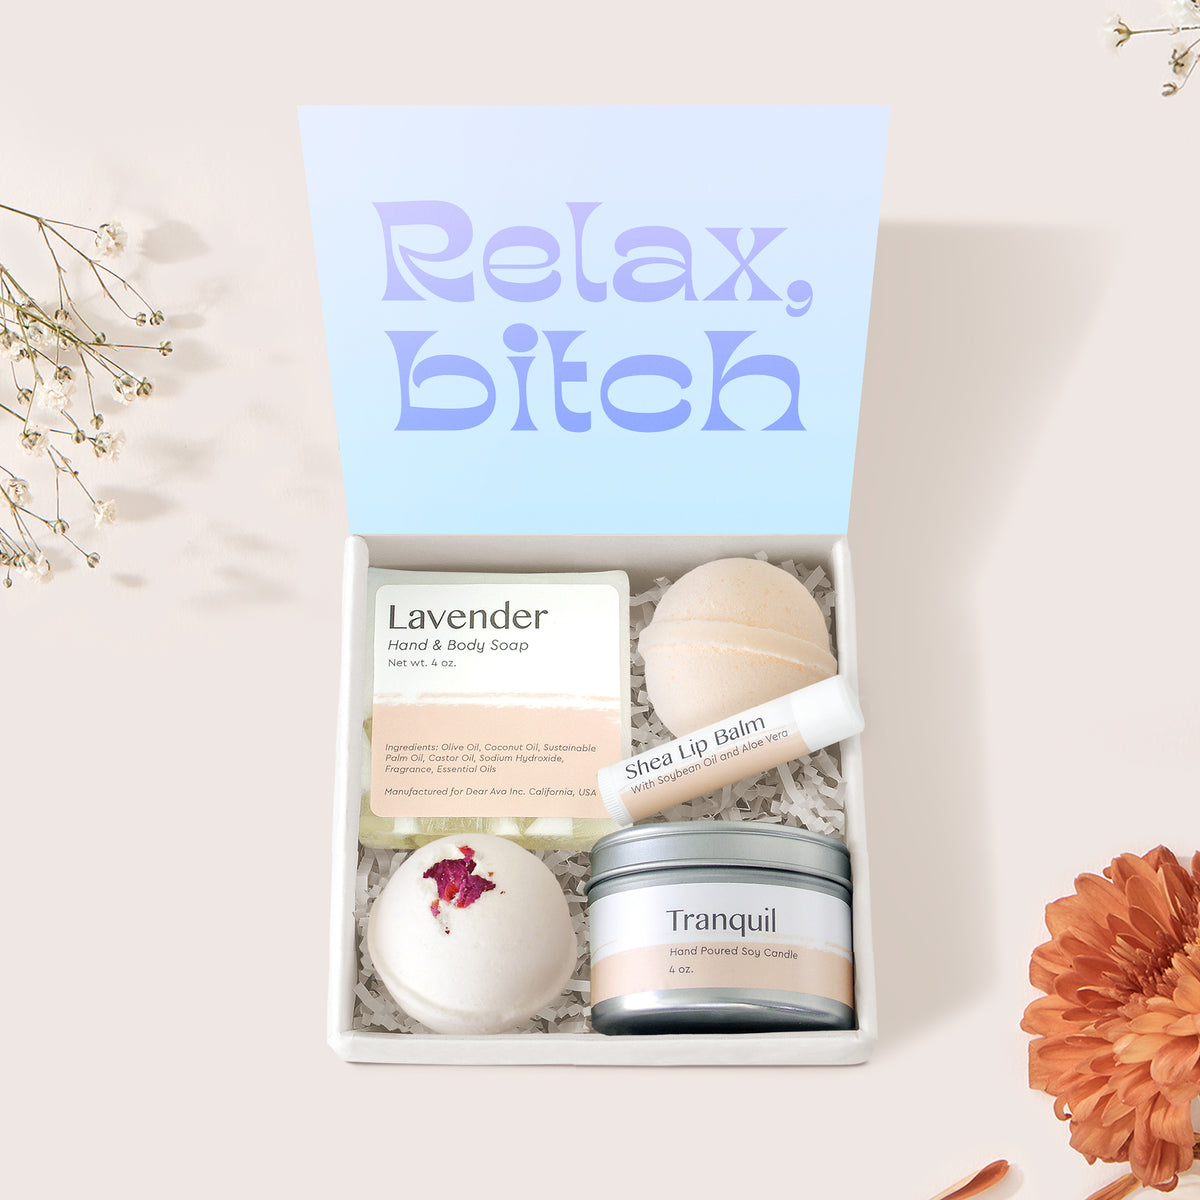 Funny Gift for Her Spa Gift Box